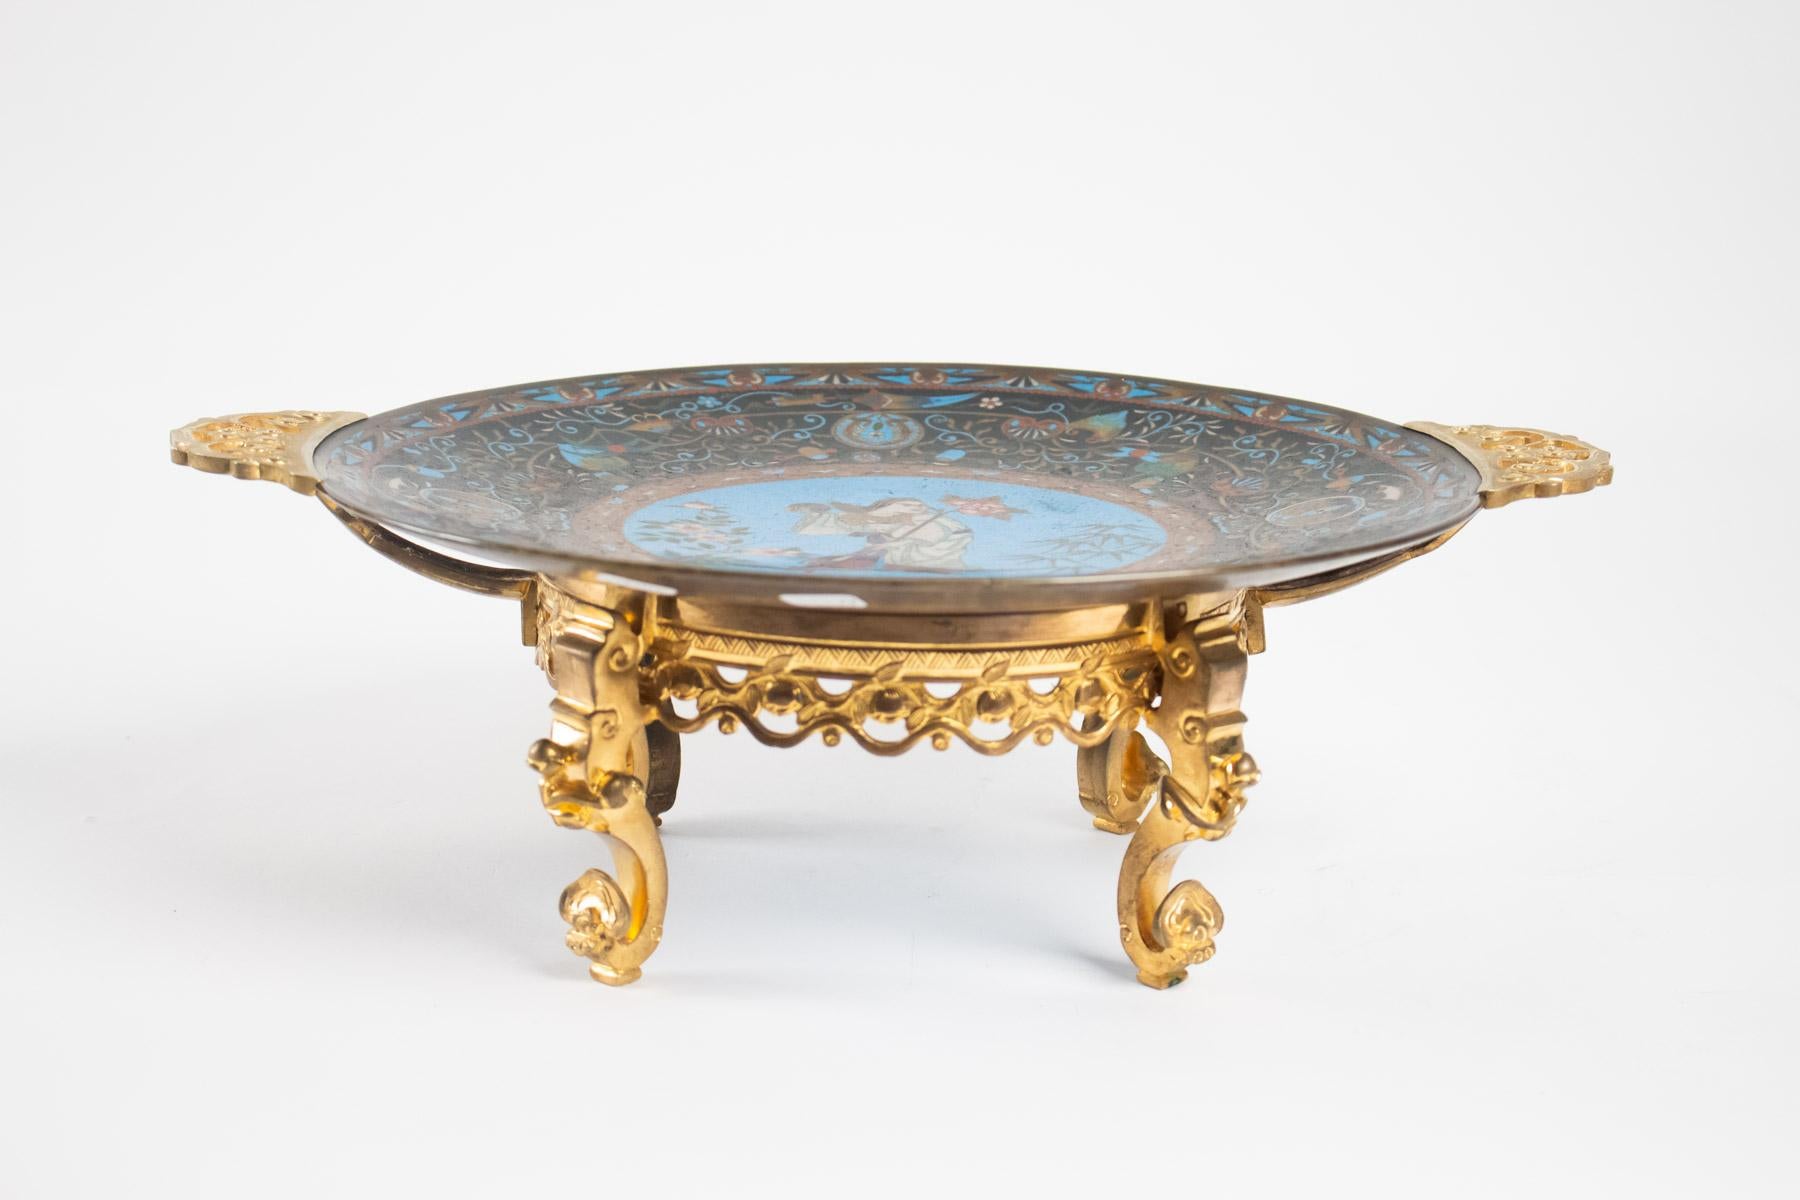 Polychrome Cloisonné enameled dish with decorative character and entrelcss fleuris, Japan,
Late Edo-early Meiji (1830-1870)
Gilded bronze mount with Japanese decoration, France, circa 1880
Measures: H 12cm, D 30cm.